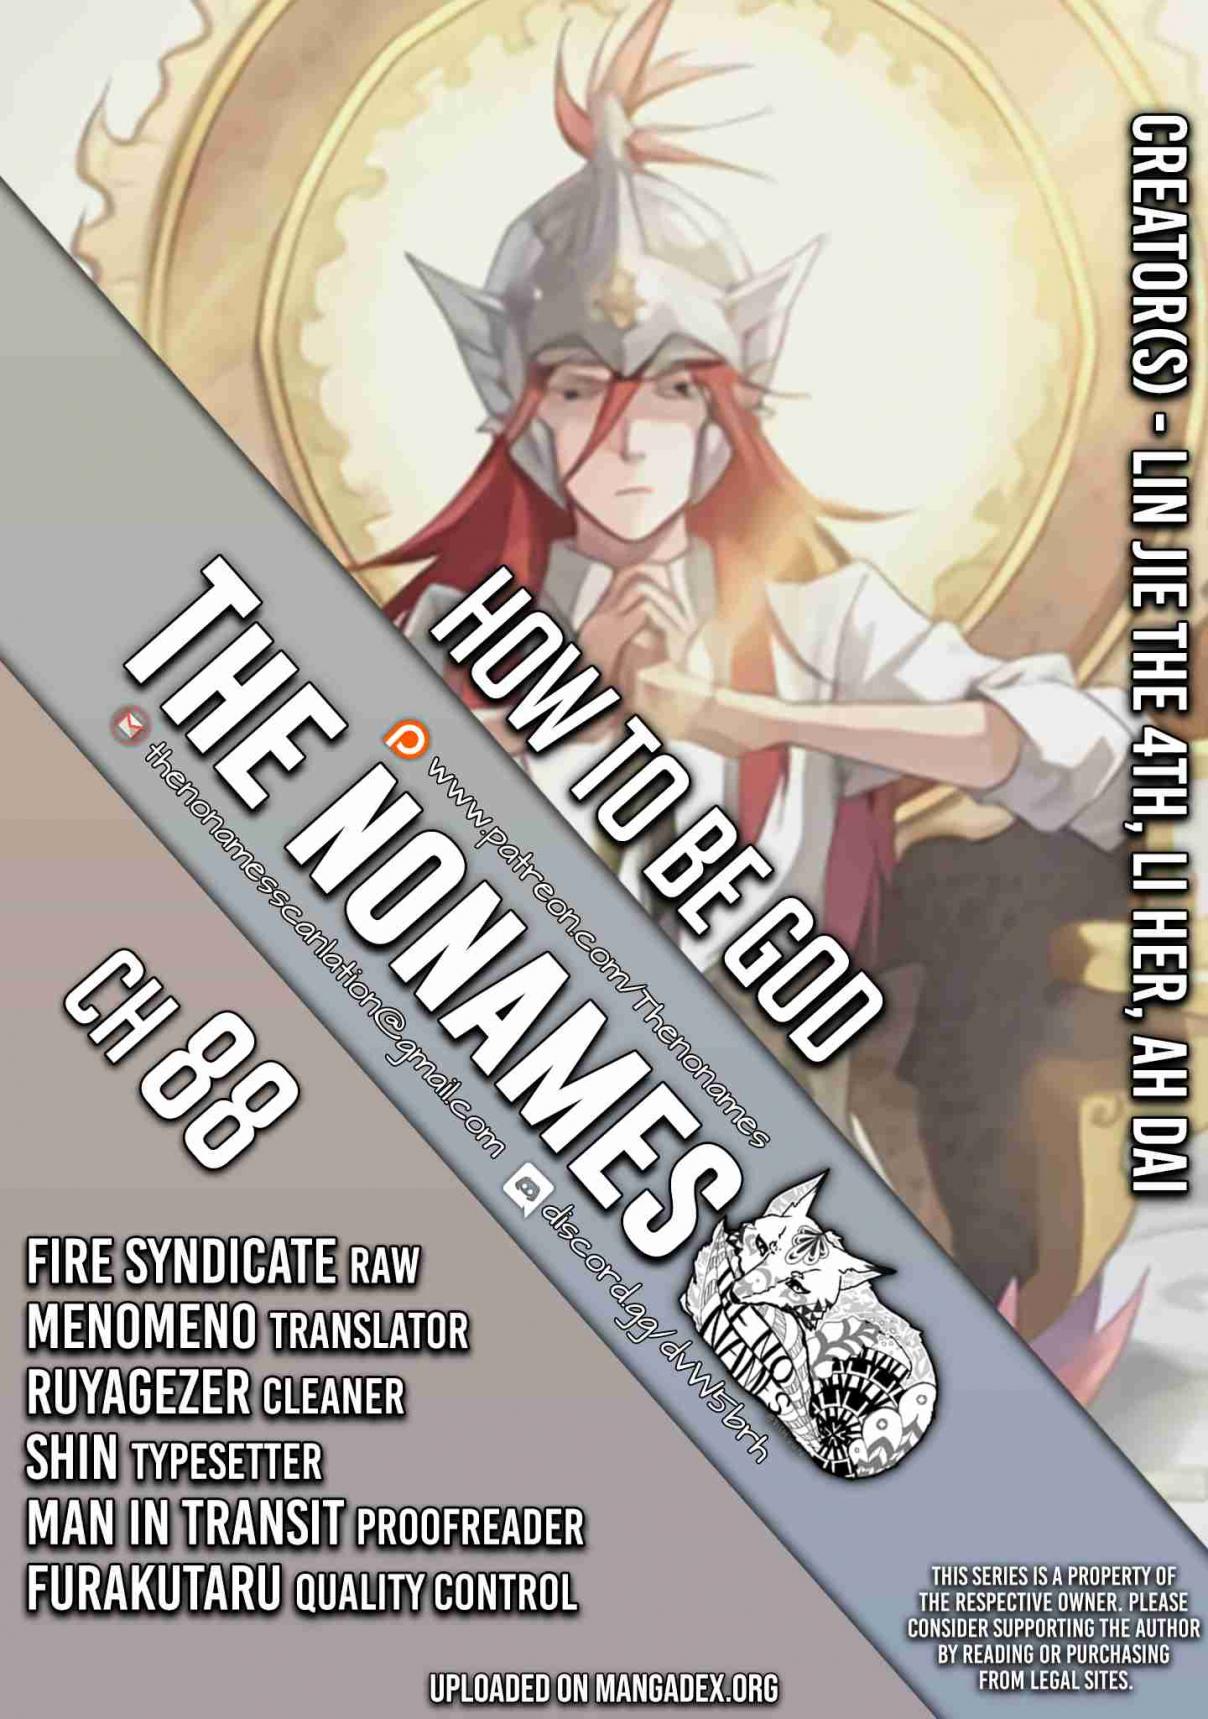 How to be God Ch. 88 Immortal Opens a Way